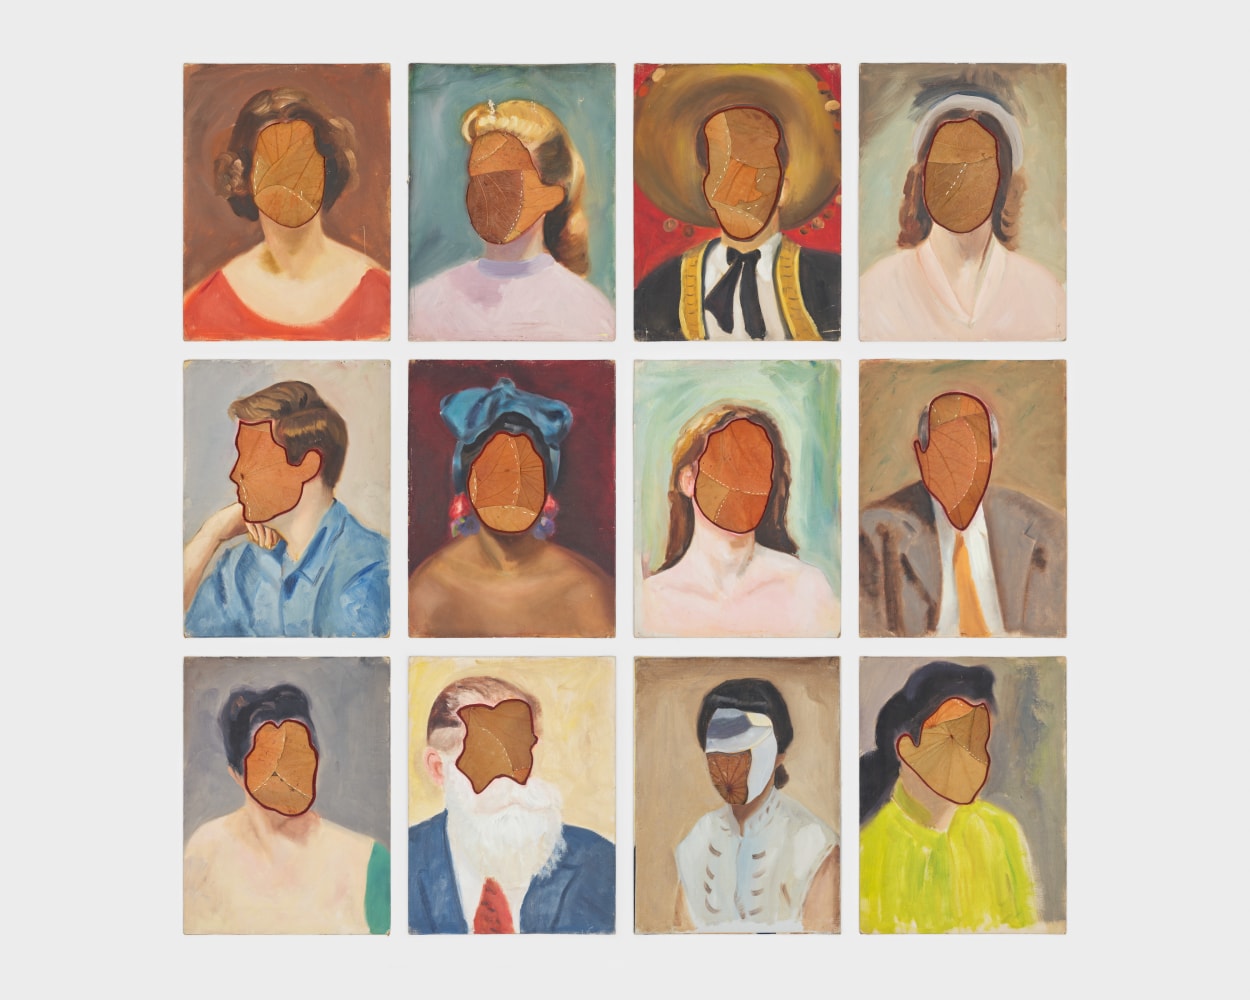 Tlacaxipehualiztli, 1998

found portraits with orchid leaf insertions

50 &amp;times;&amp;nbsp;51 in. / 127 &amp;times;&amp;nbsp;129.5 cm